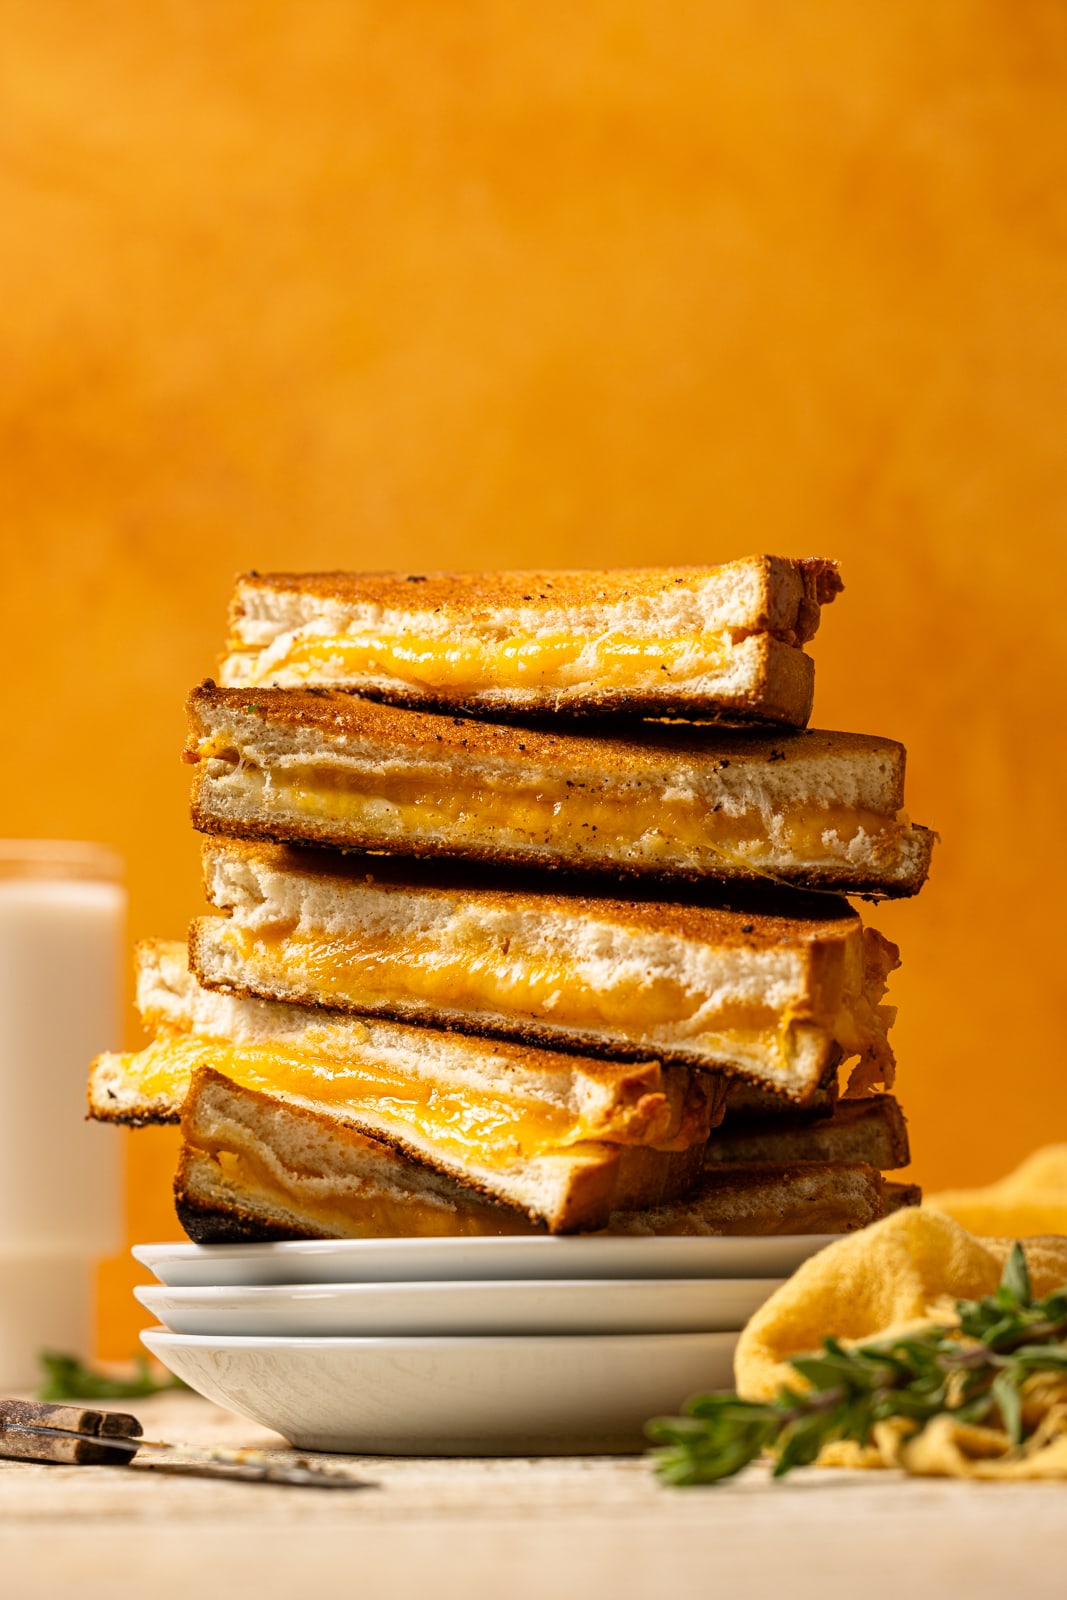 Stack of grilled cheese sandwiches on white plates with a glass of milk.